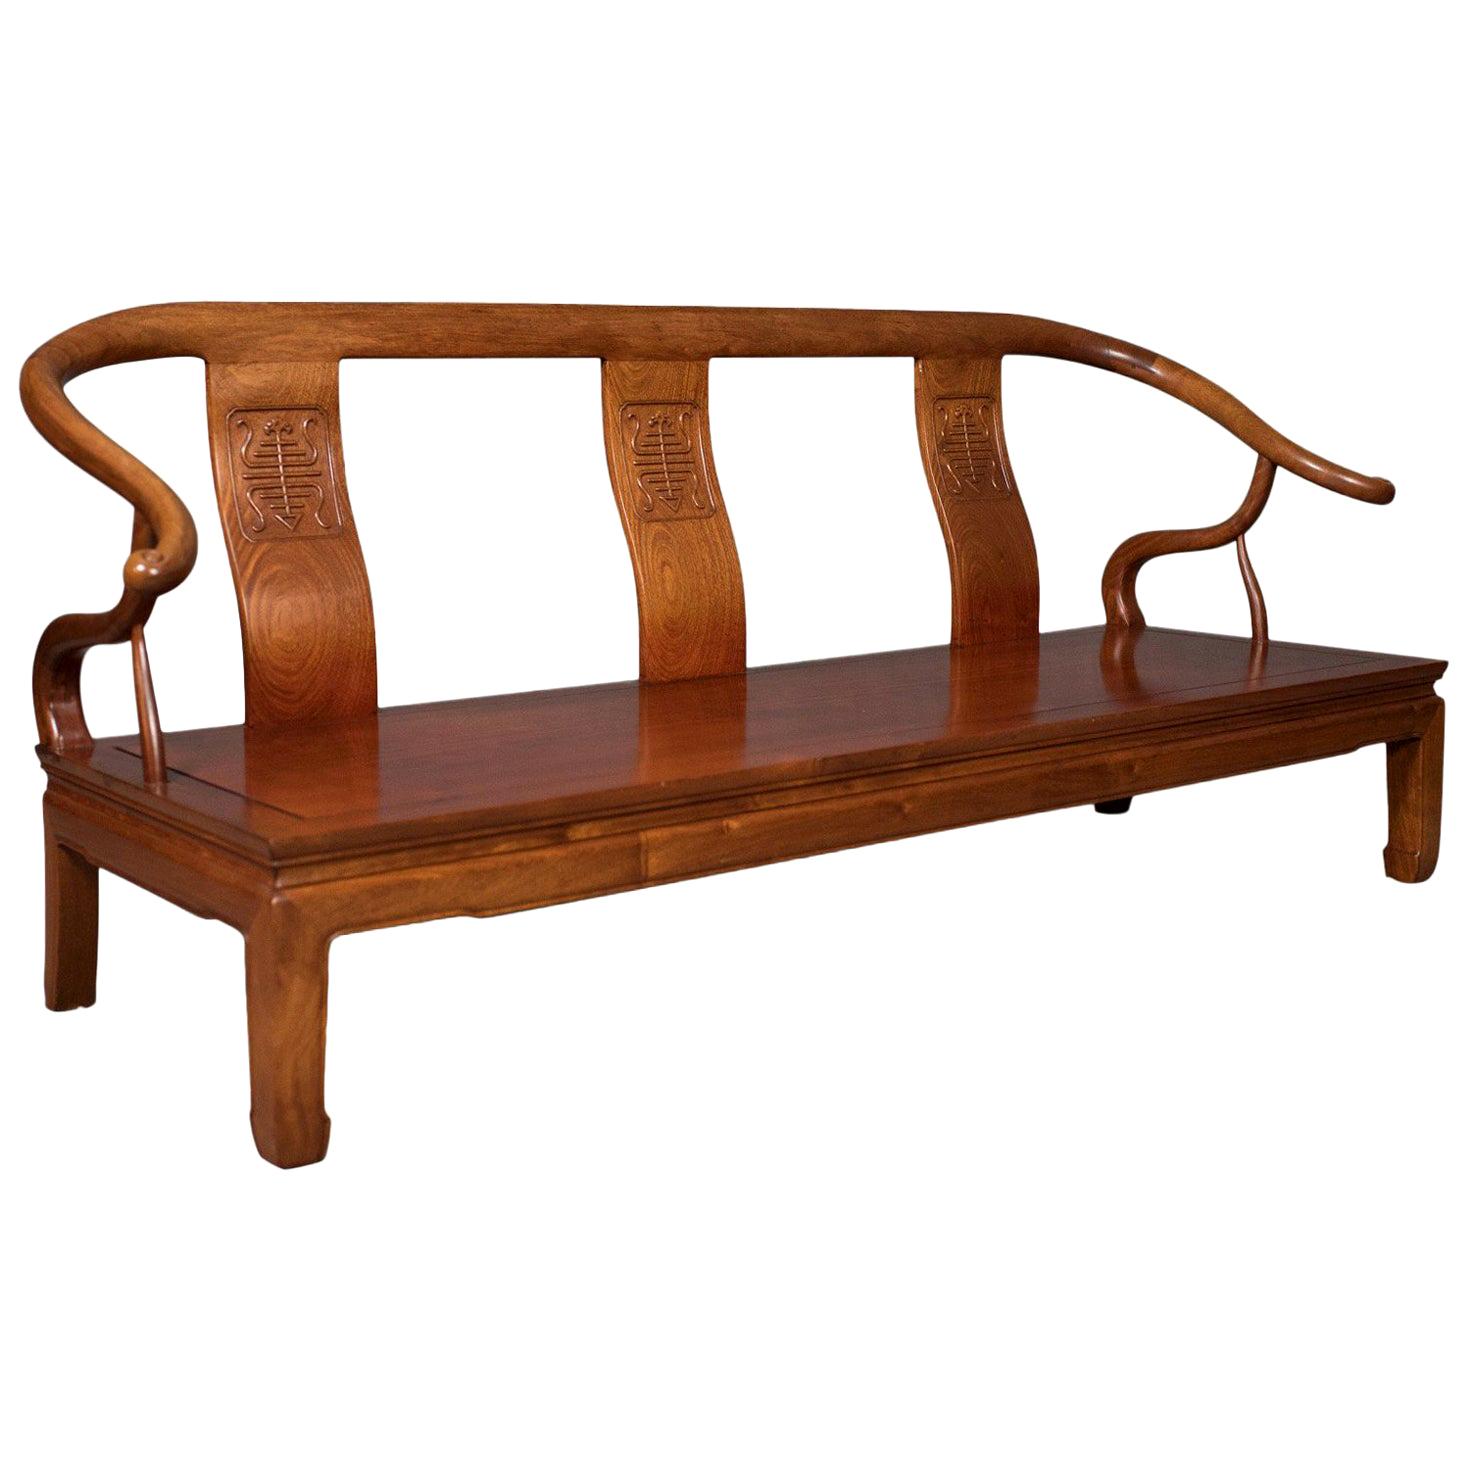 Chinese Rosewood Three-Seat Bench in Traditional Form, Late 20th Century